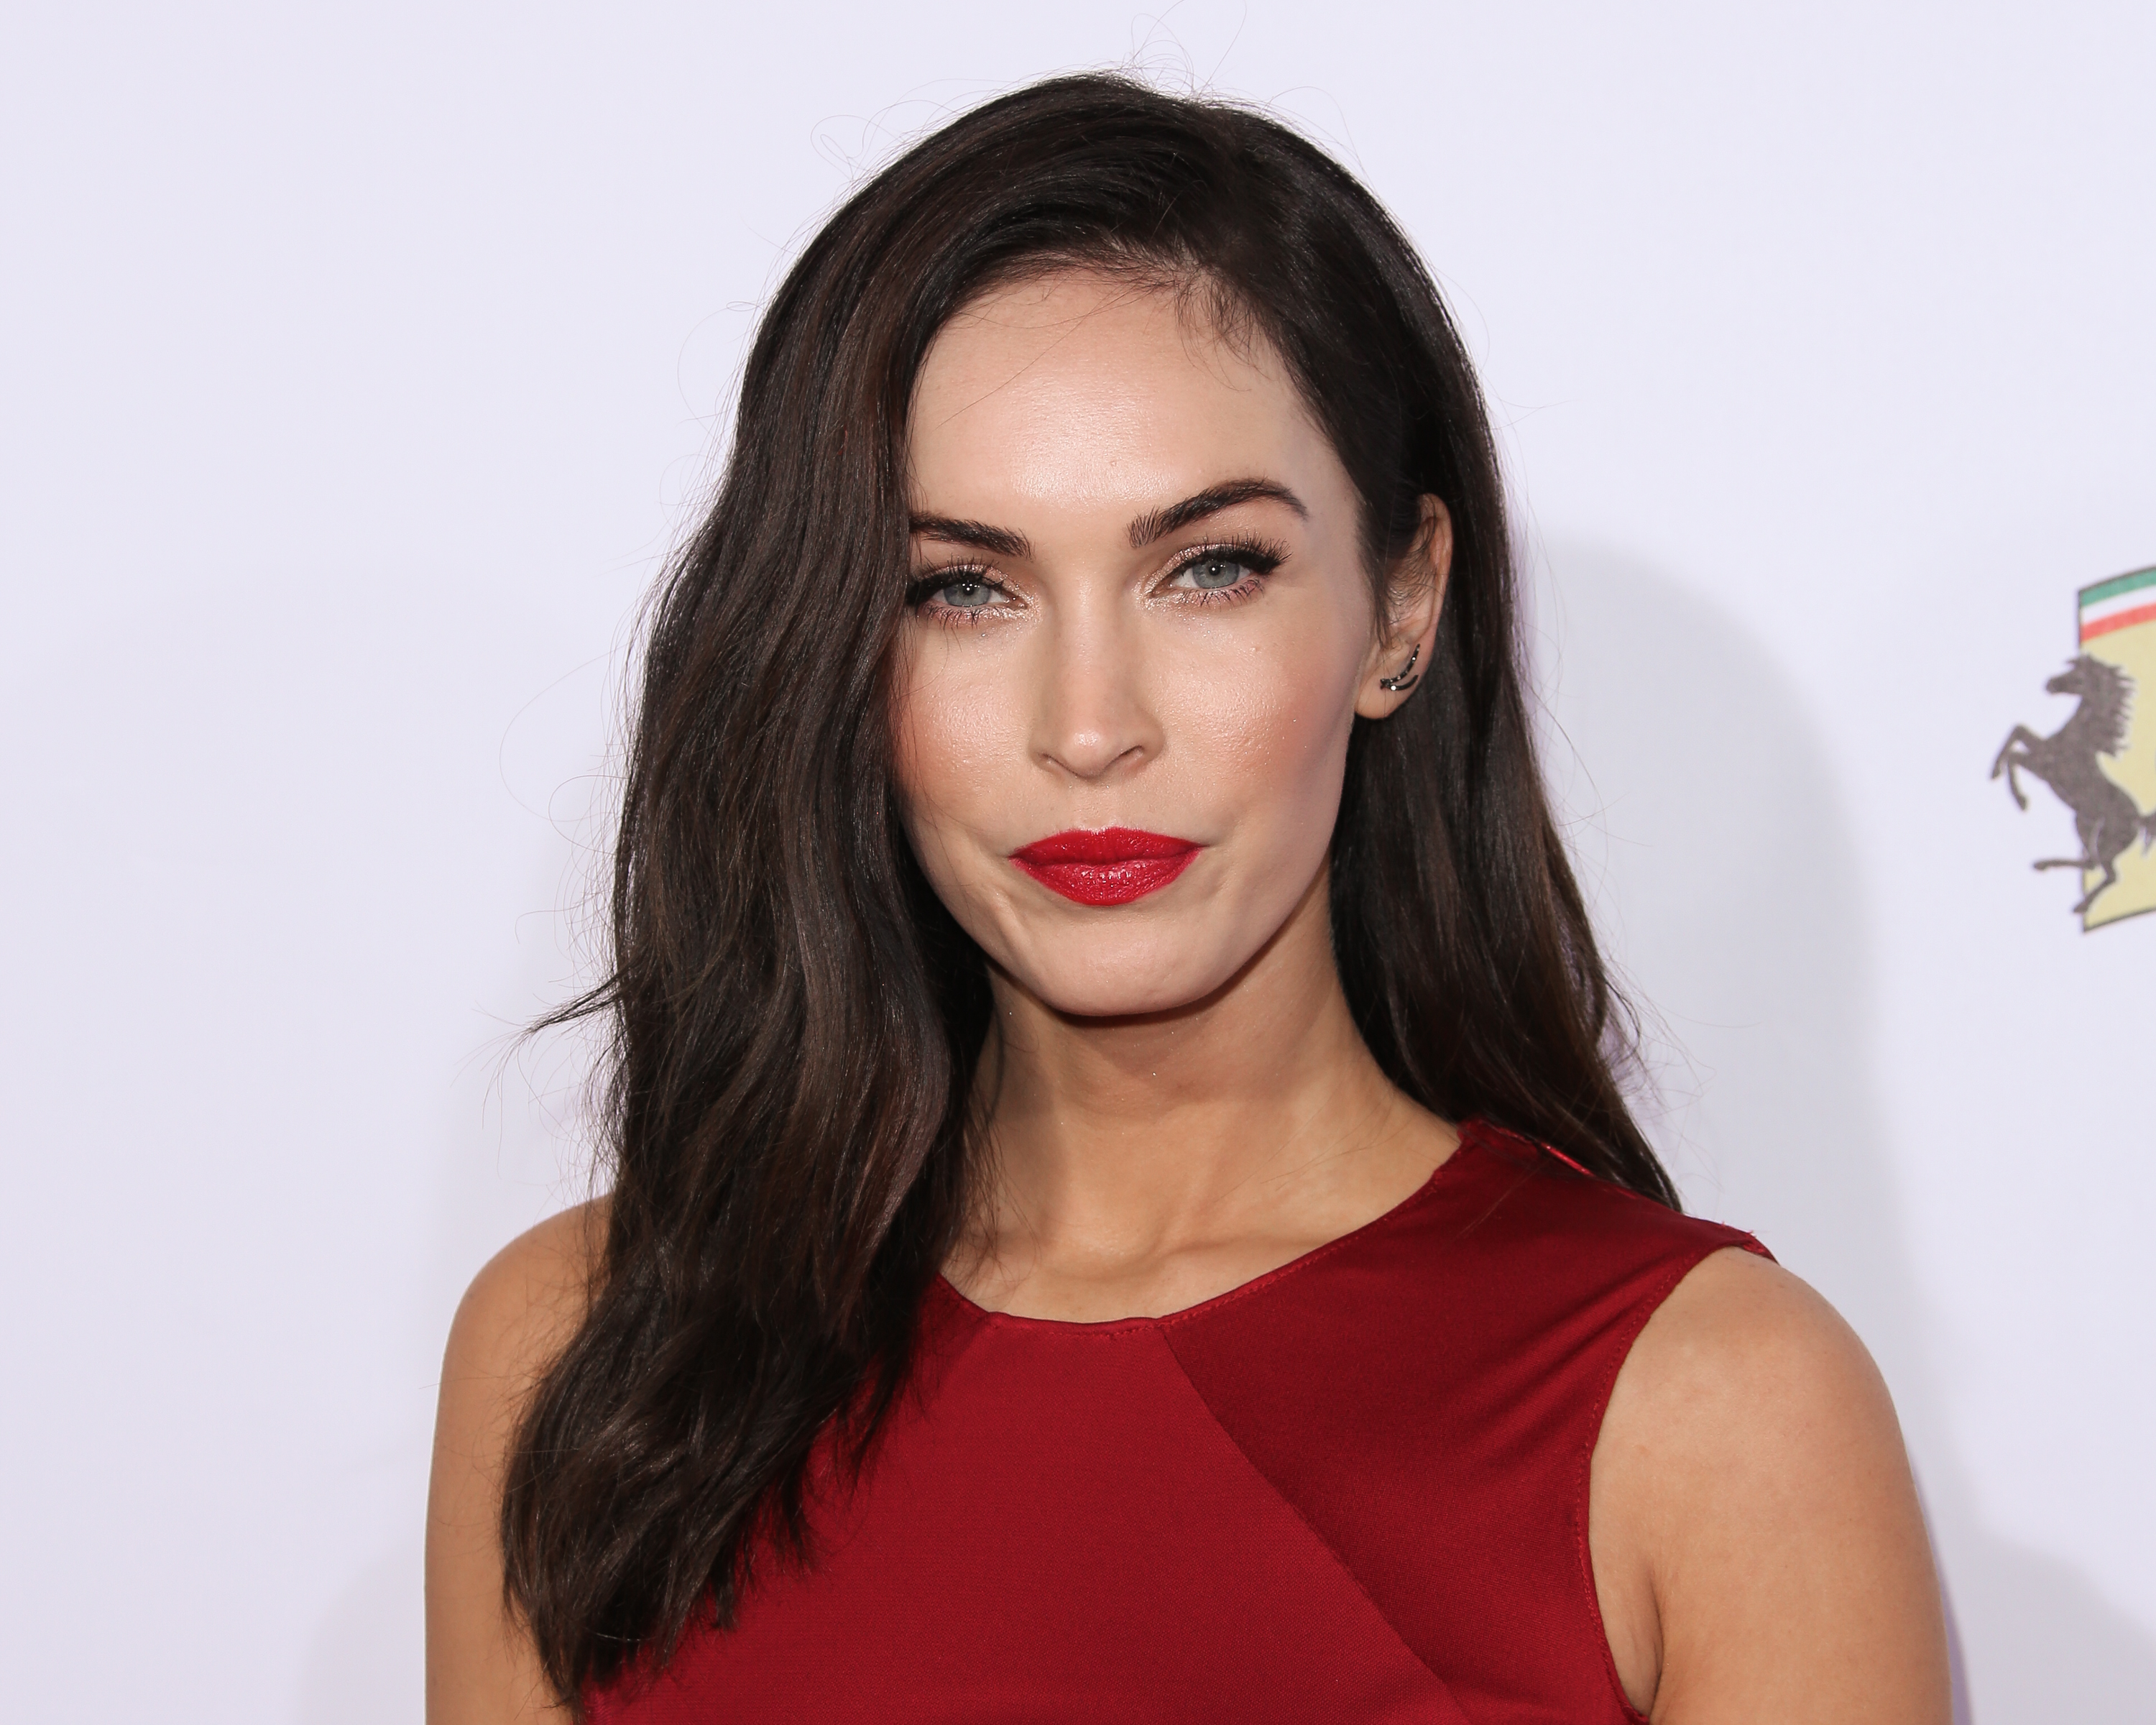 Megan Fox attends Ferrari's 60th Anniversary In The USA Gala at the Wallis Annenberg Center for the Performing Arts  in Beverly Hills, Calif. on Oct. 11, 2014. (Paul Archuleta—FilmMagic/Getty Images)